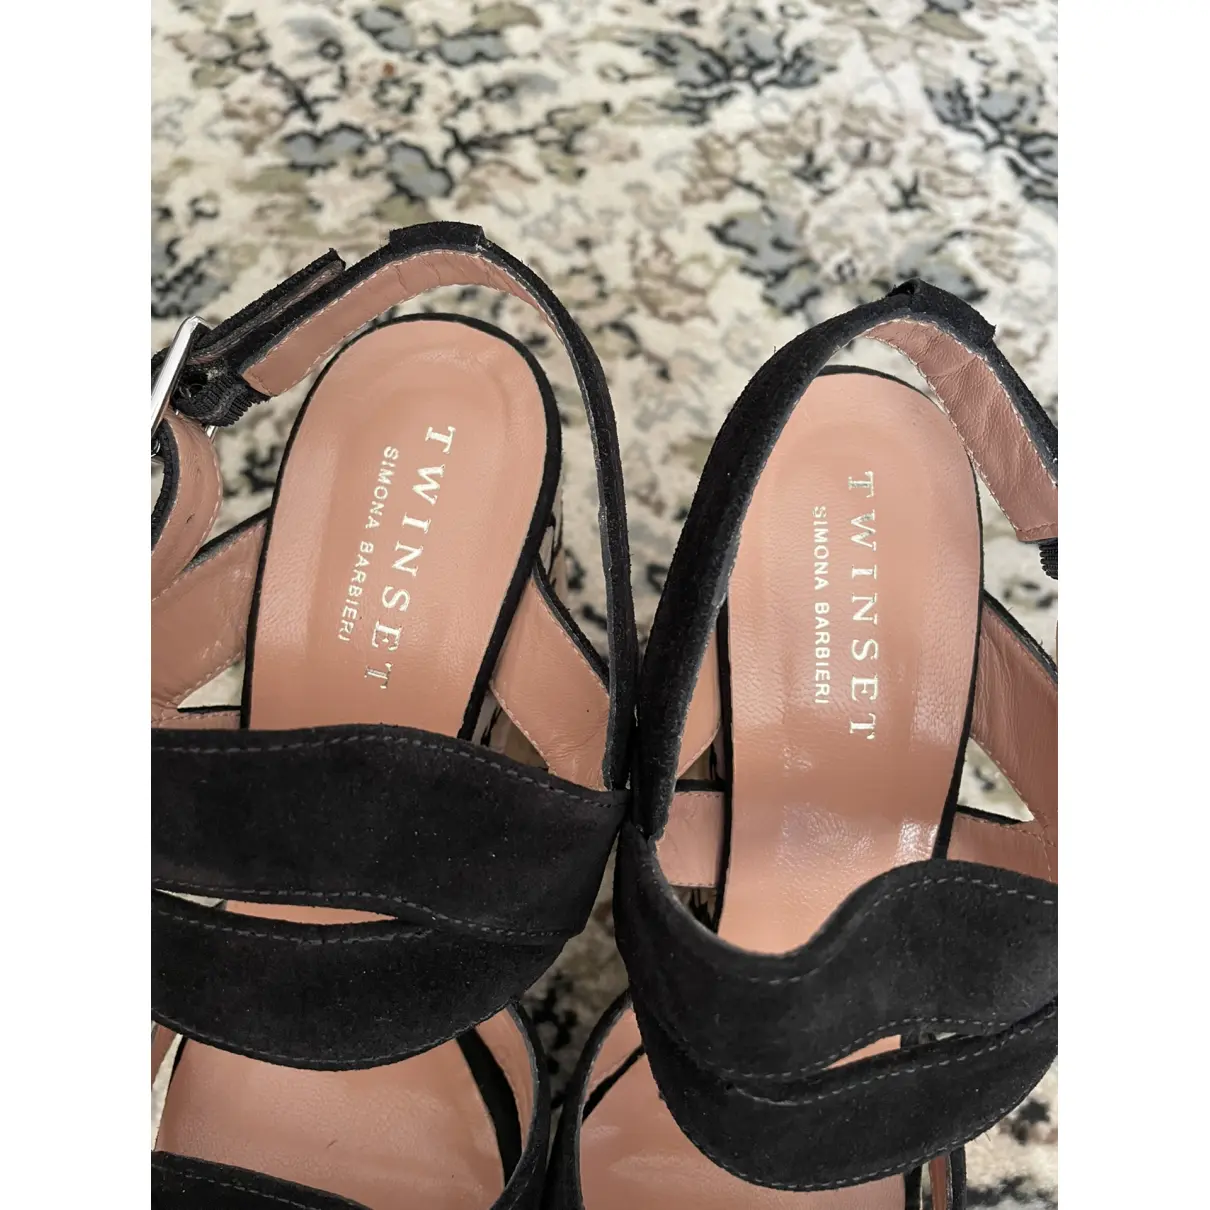 Buy Twinset Leather sandal online